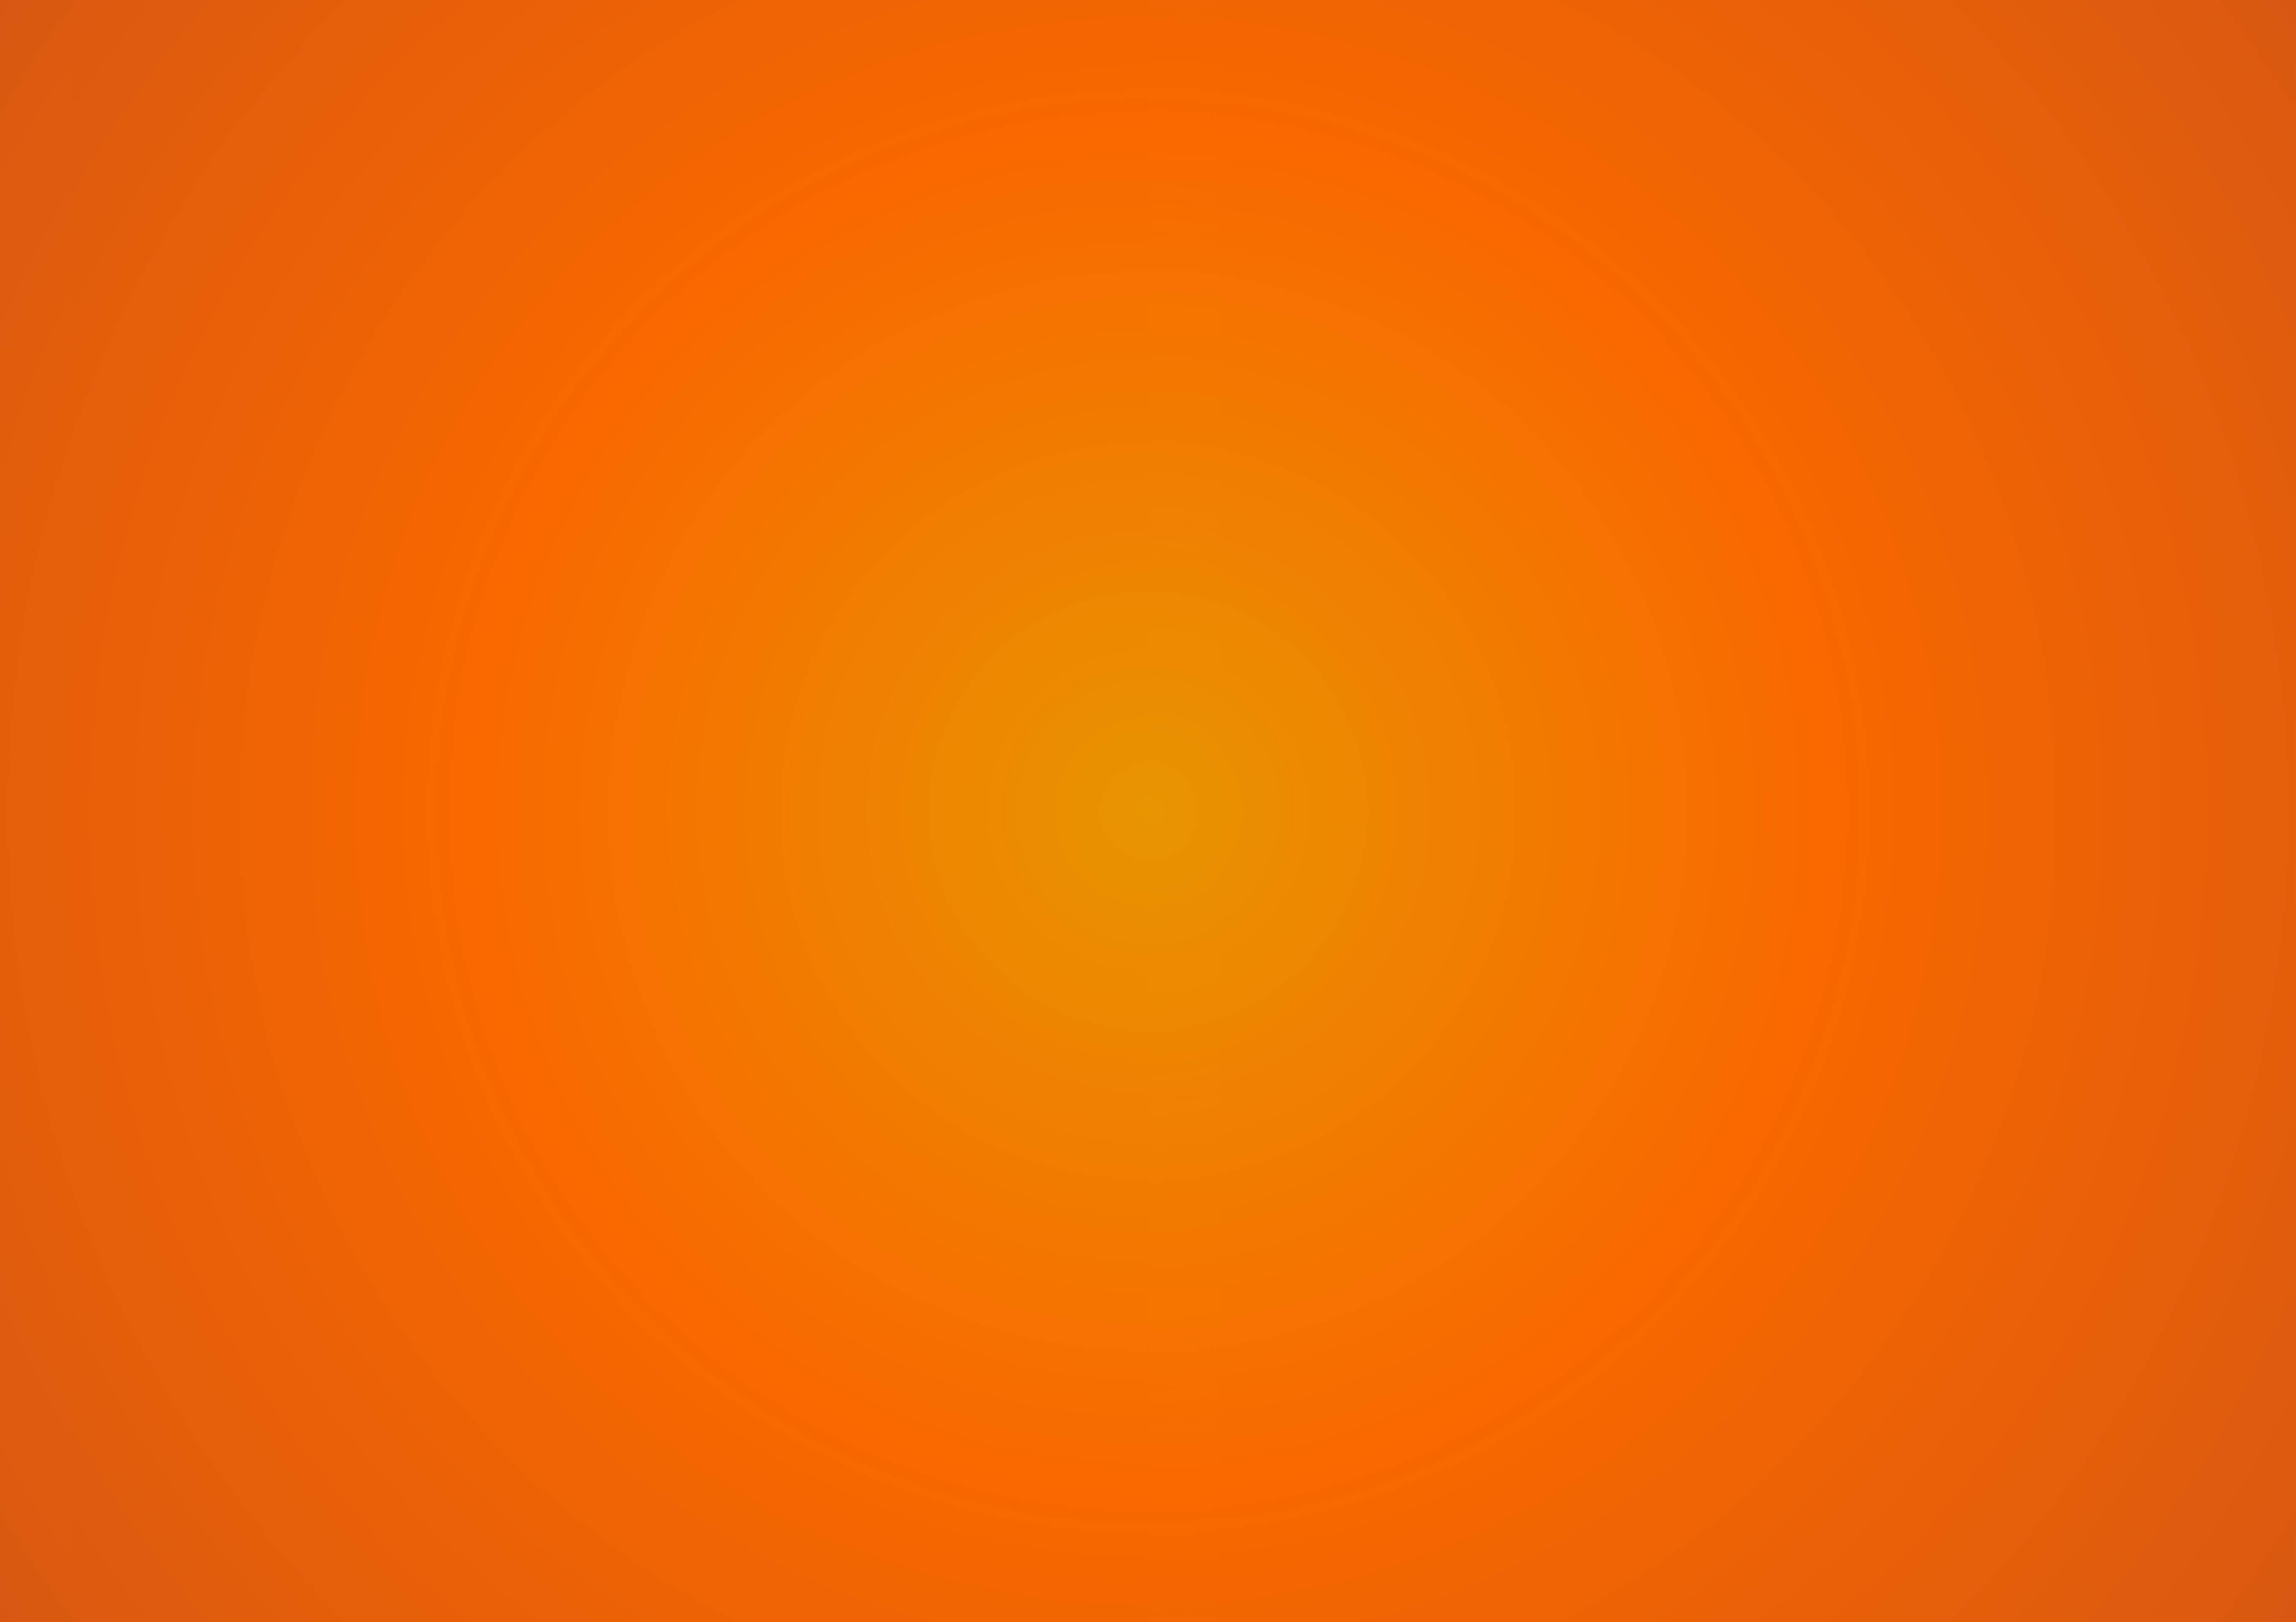 Orange Gradient Background Stock Photos, Images and Backgrounds ...